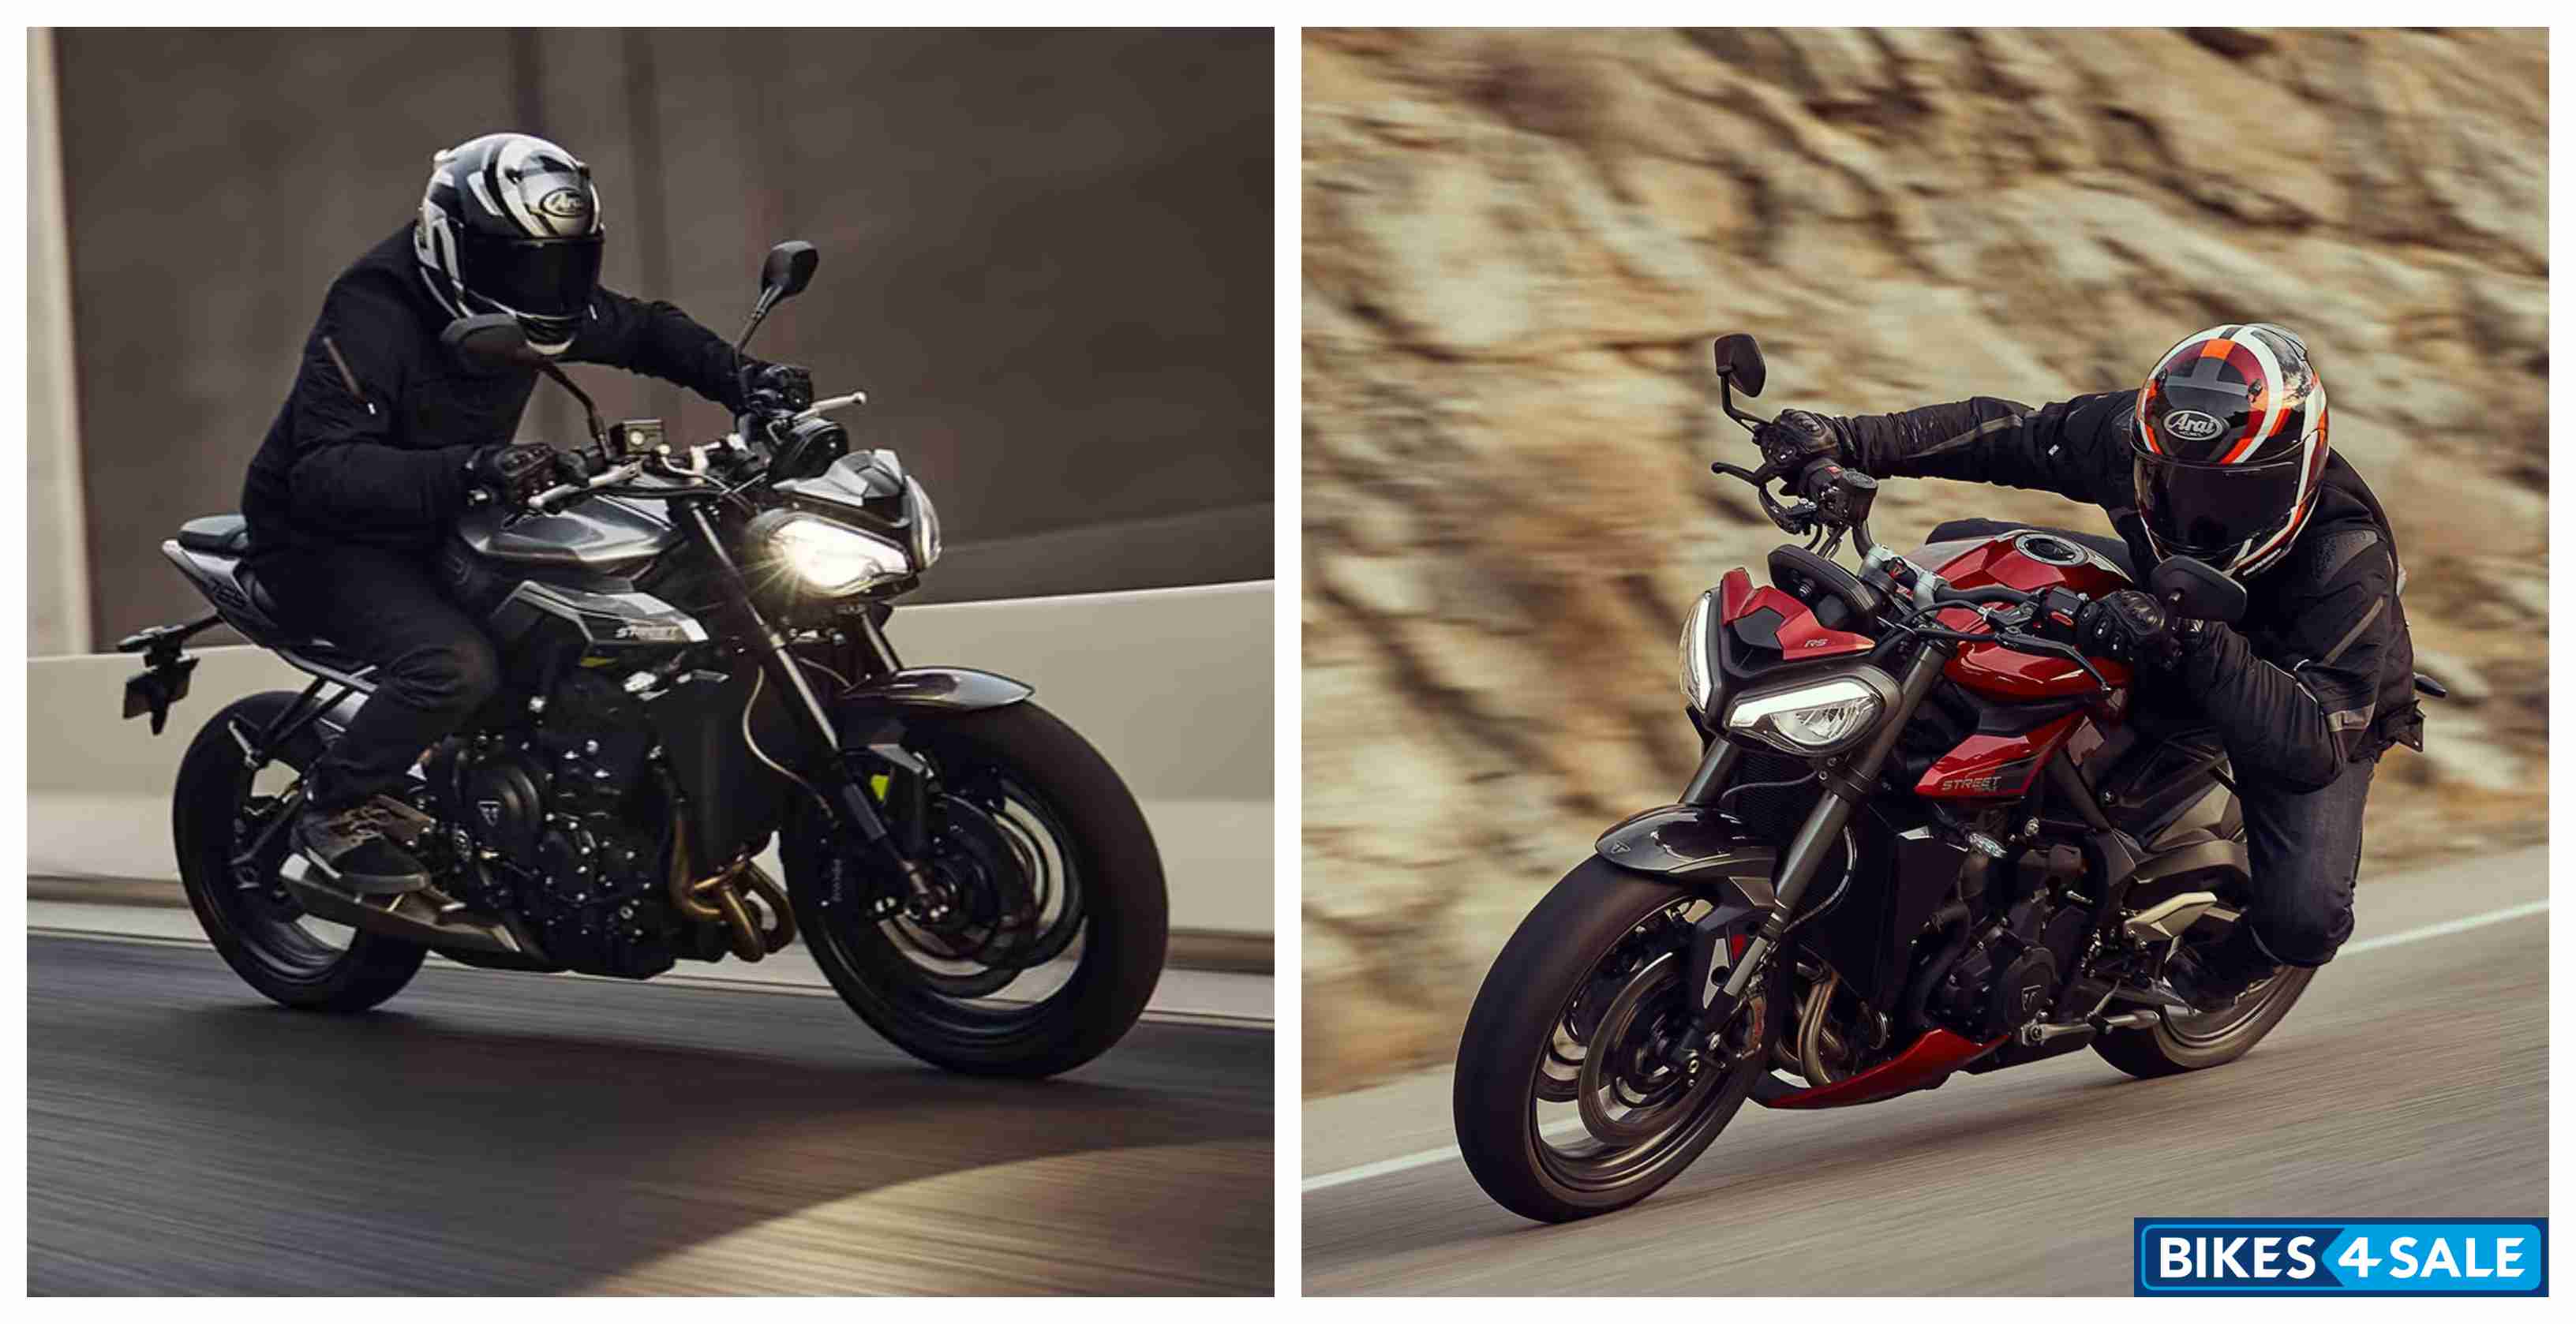 New Street Triple 765 R And Rs